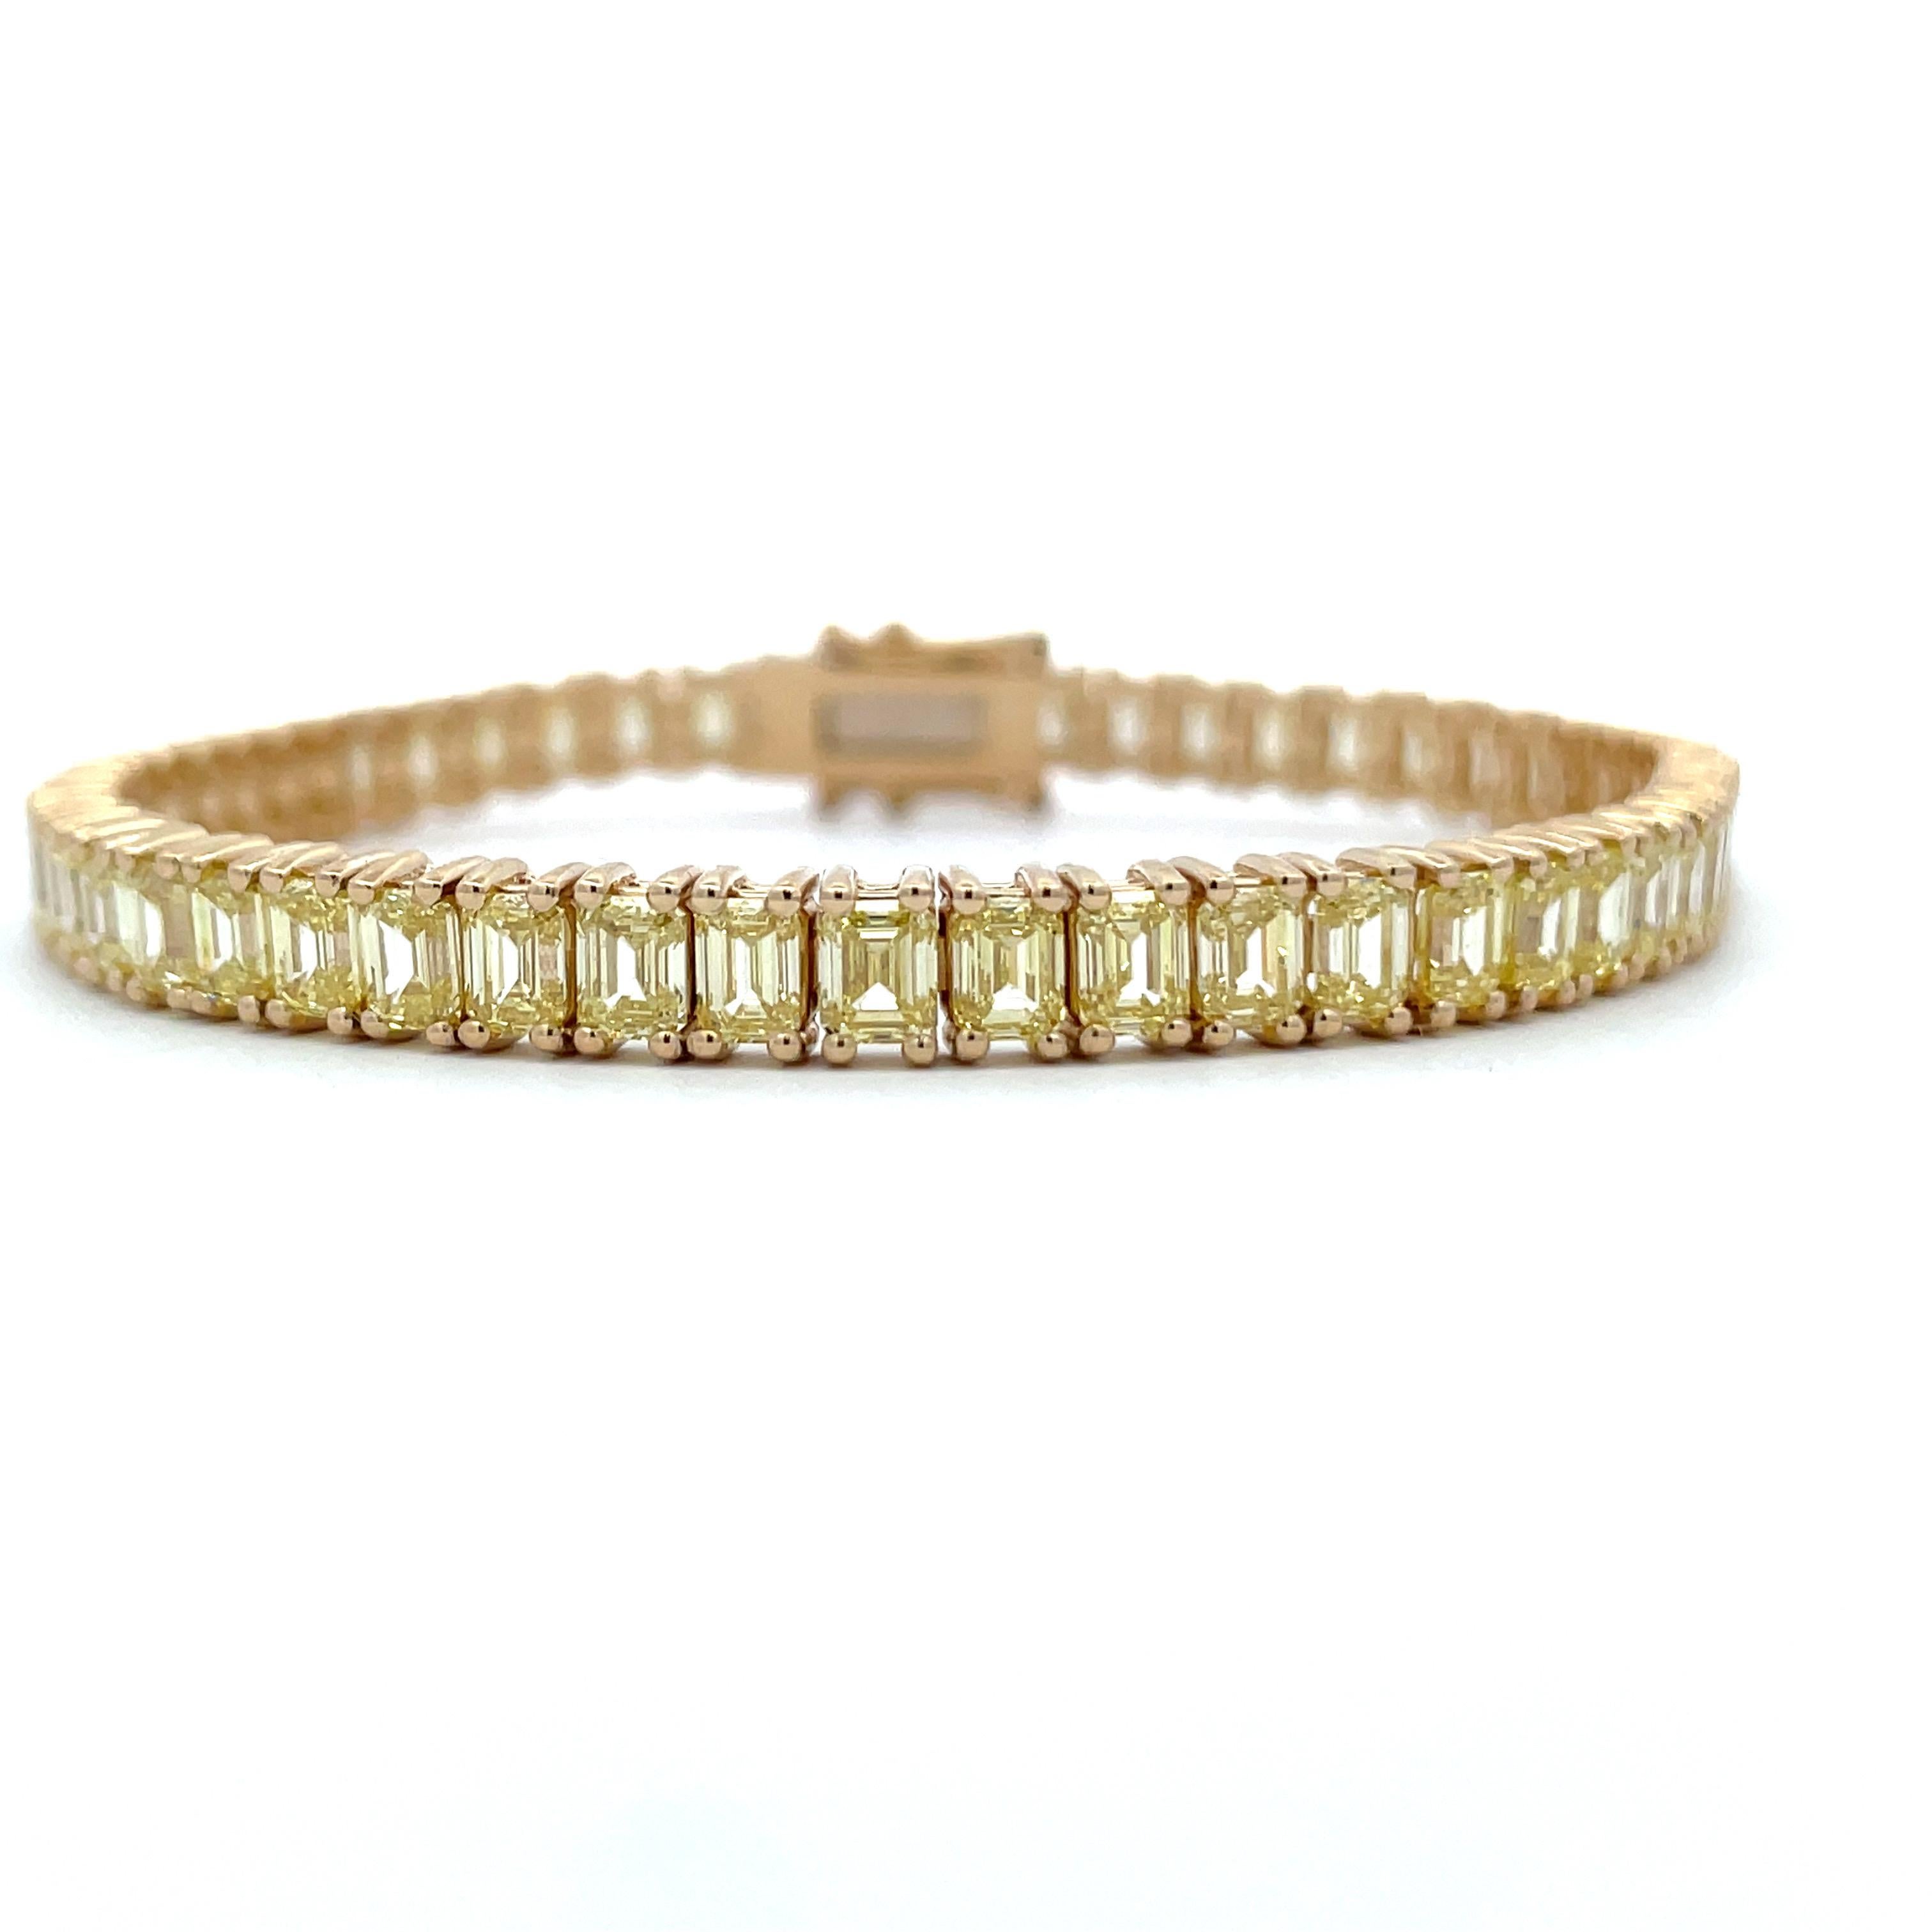 14 Karat yellow gold tennis bracelet featuring 55 Fancy Yellow Emerald Cut Diamonds weighing 12.55 Carats. Clarity VS2
Available in white diamonds.